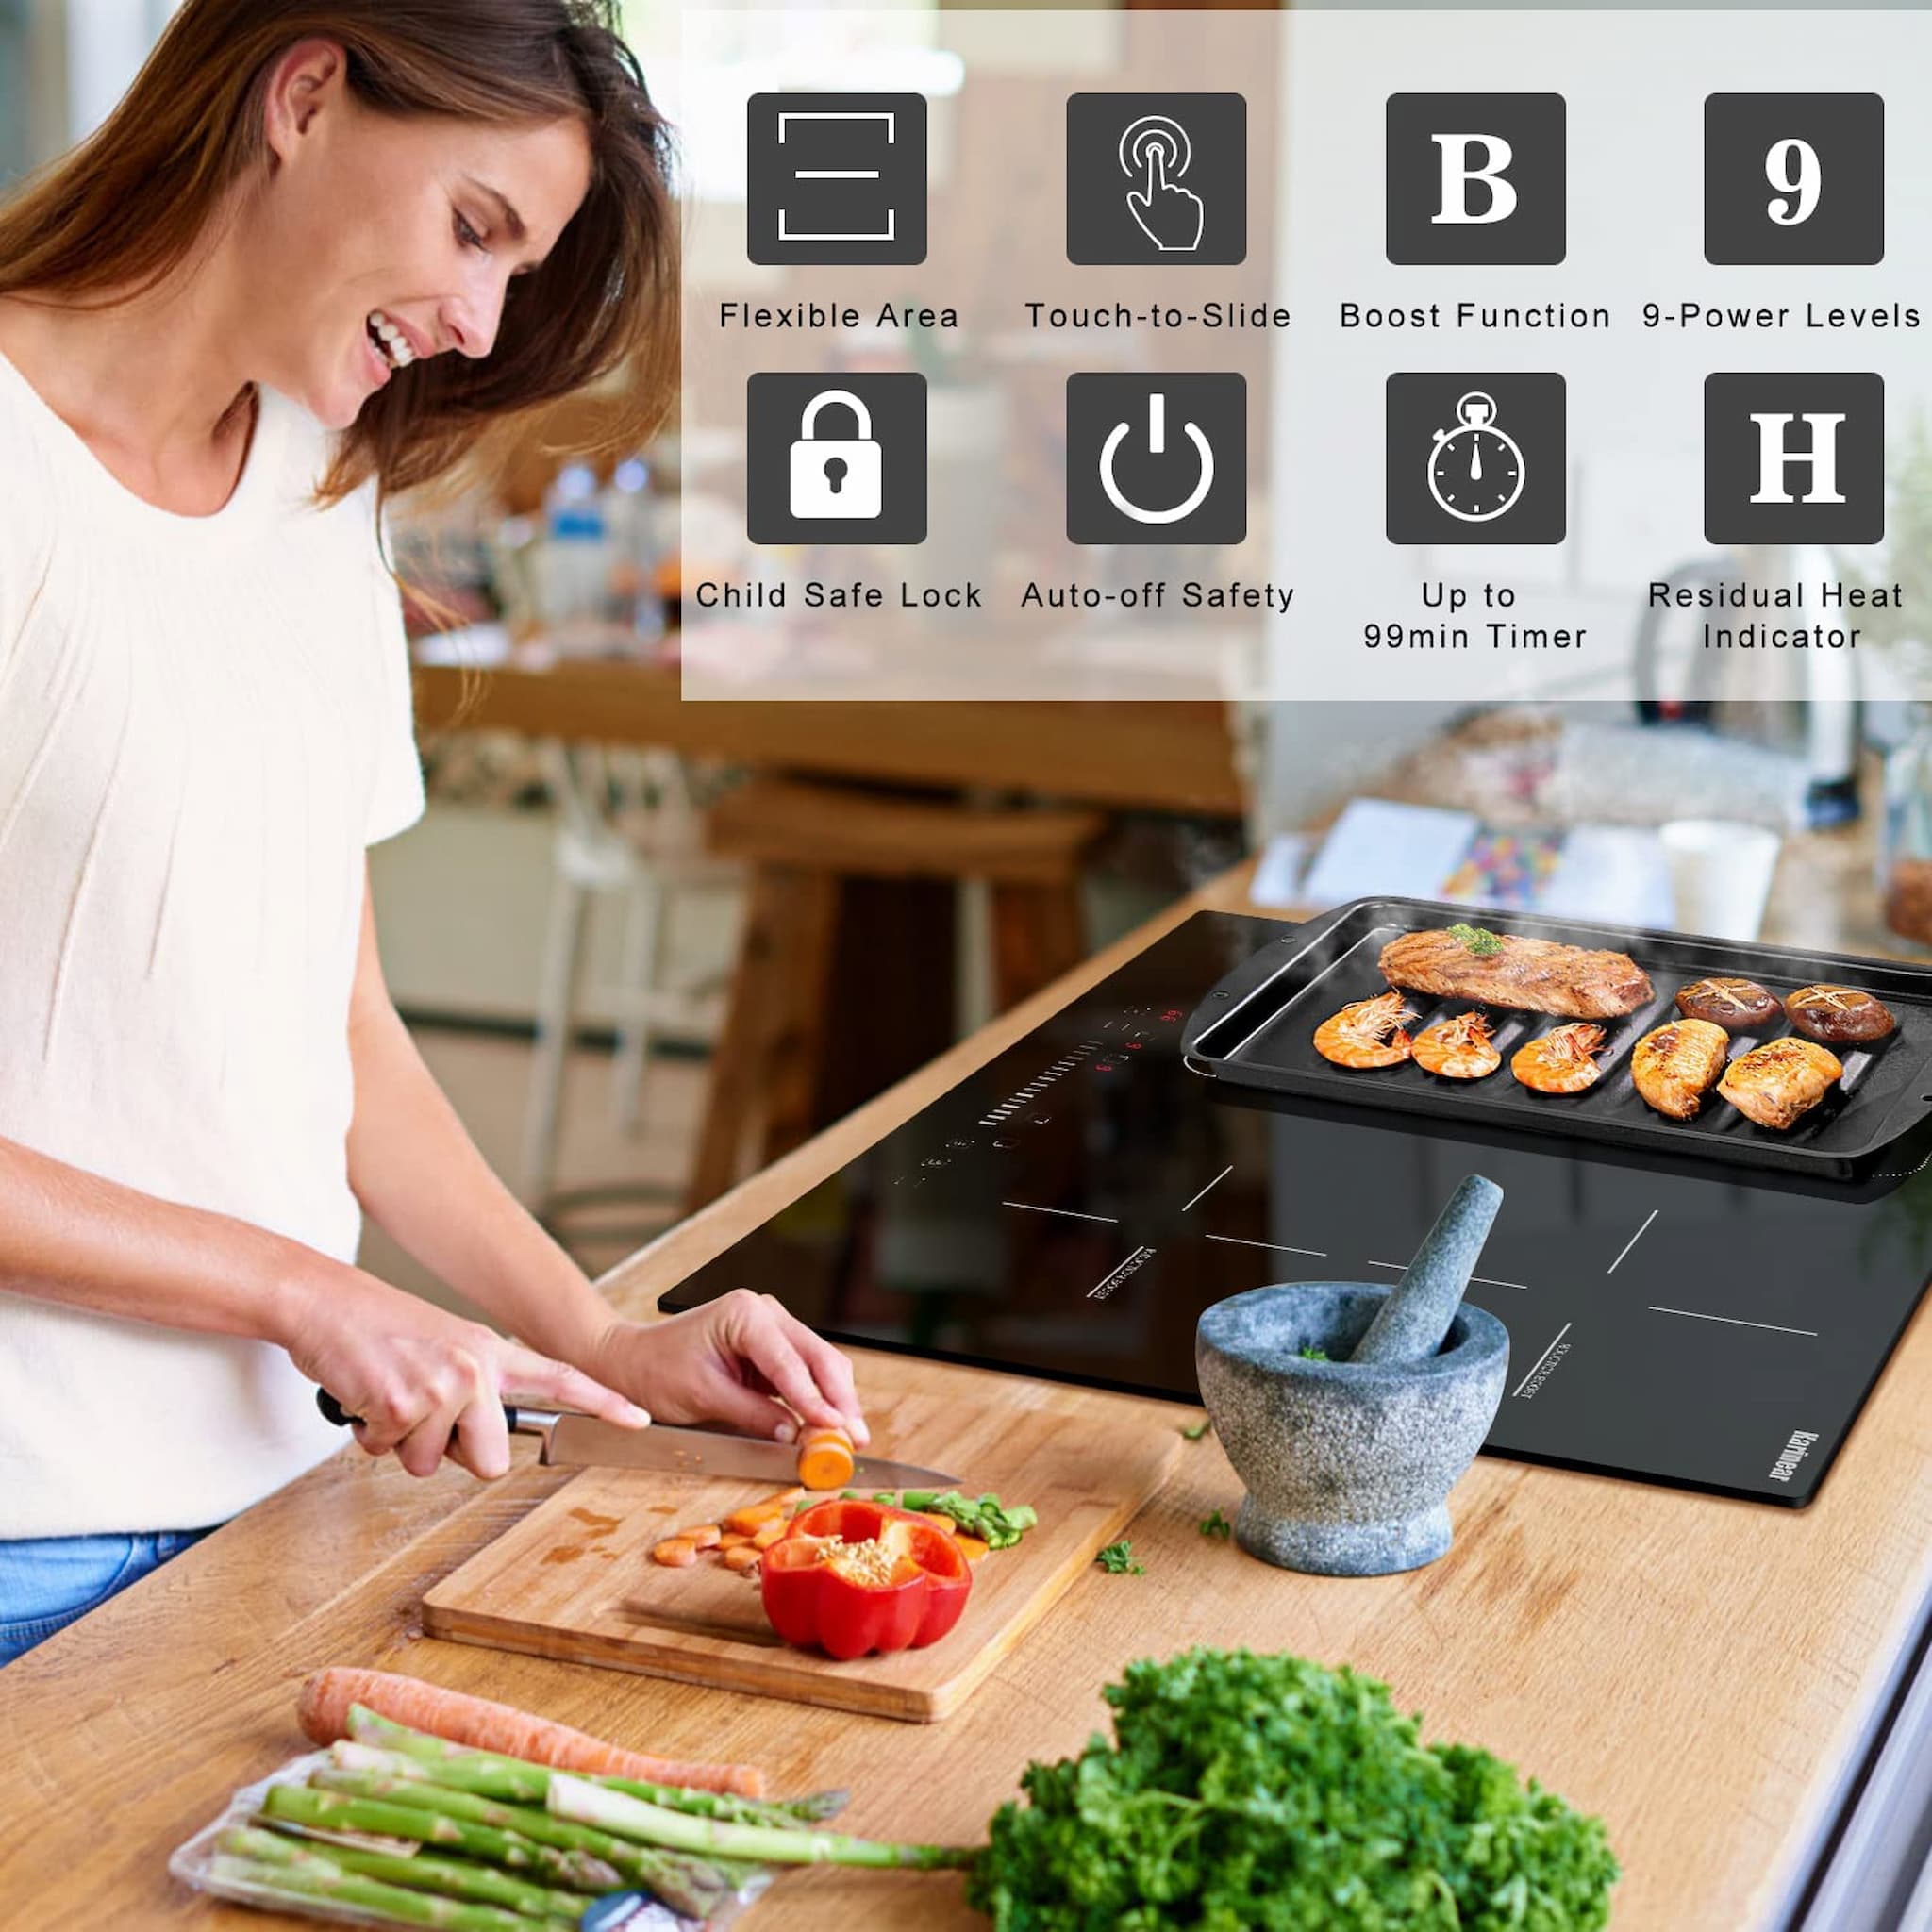 Karinear Induction Hob, Upgraded 4 Zones Electric Hob 60 cm with Boost Function, 7200W Slider Control with Flex Zone